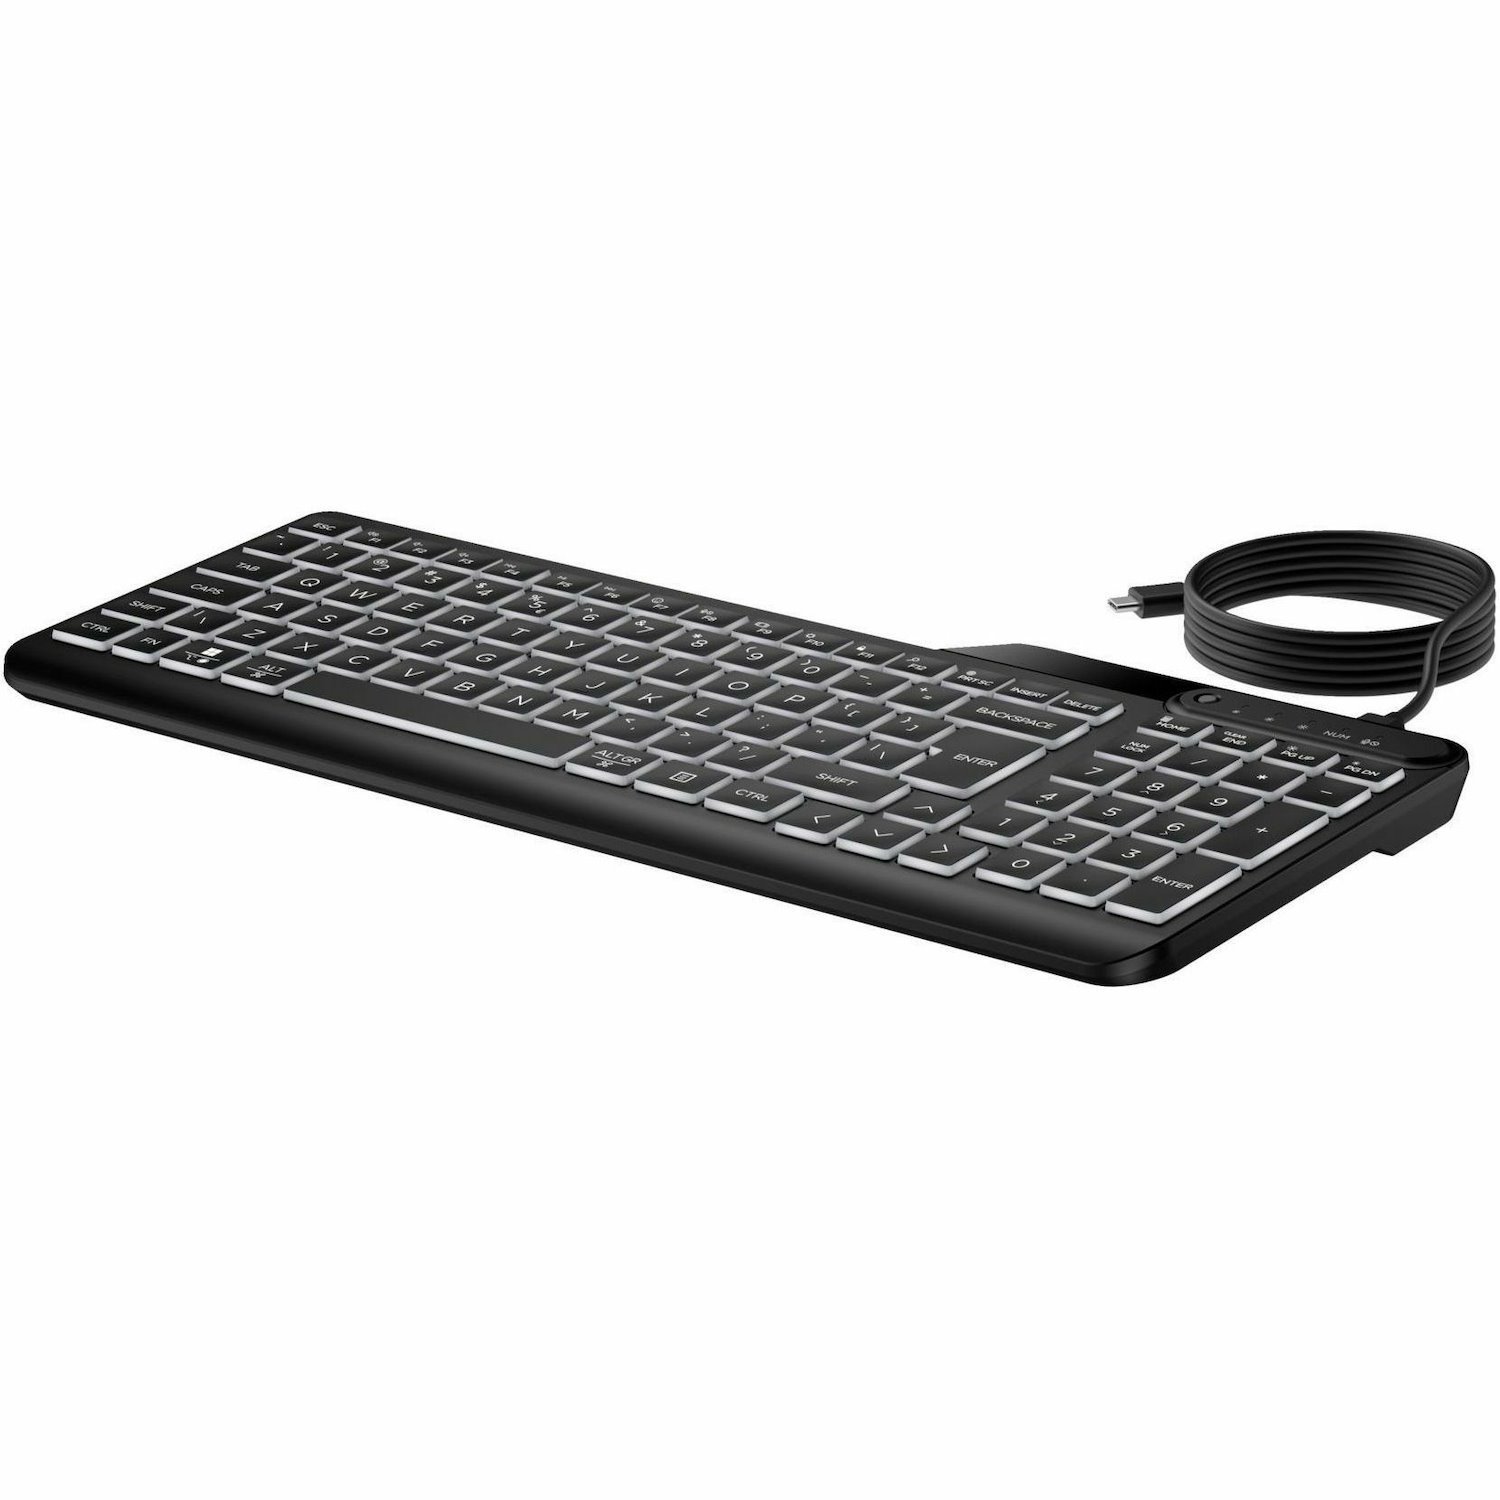 HP 405 Keyboard - Cable Connectivity - USB Type A Interface - LED - Black